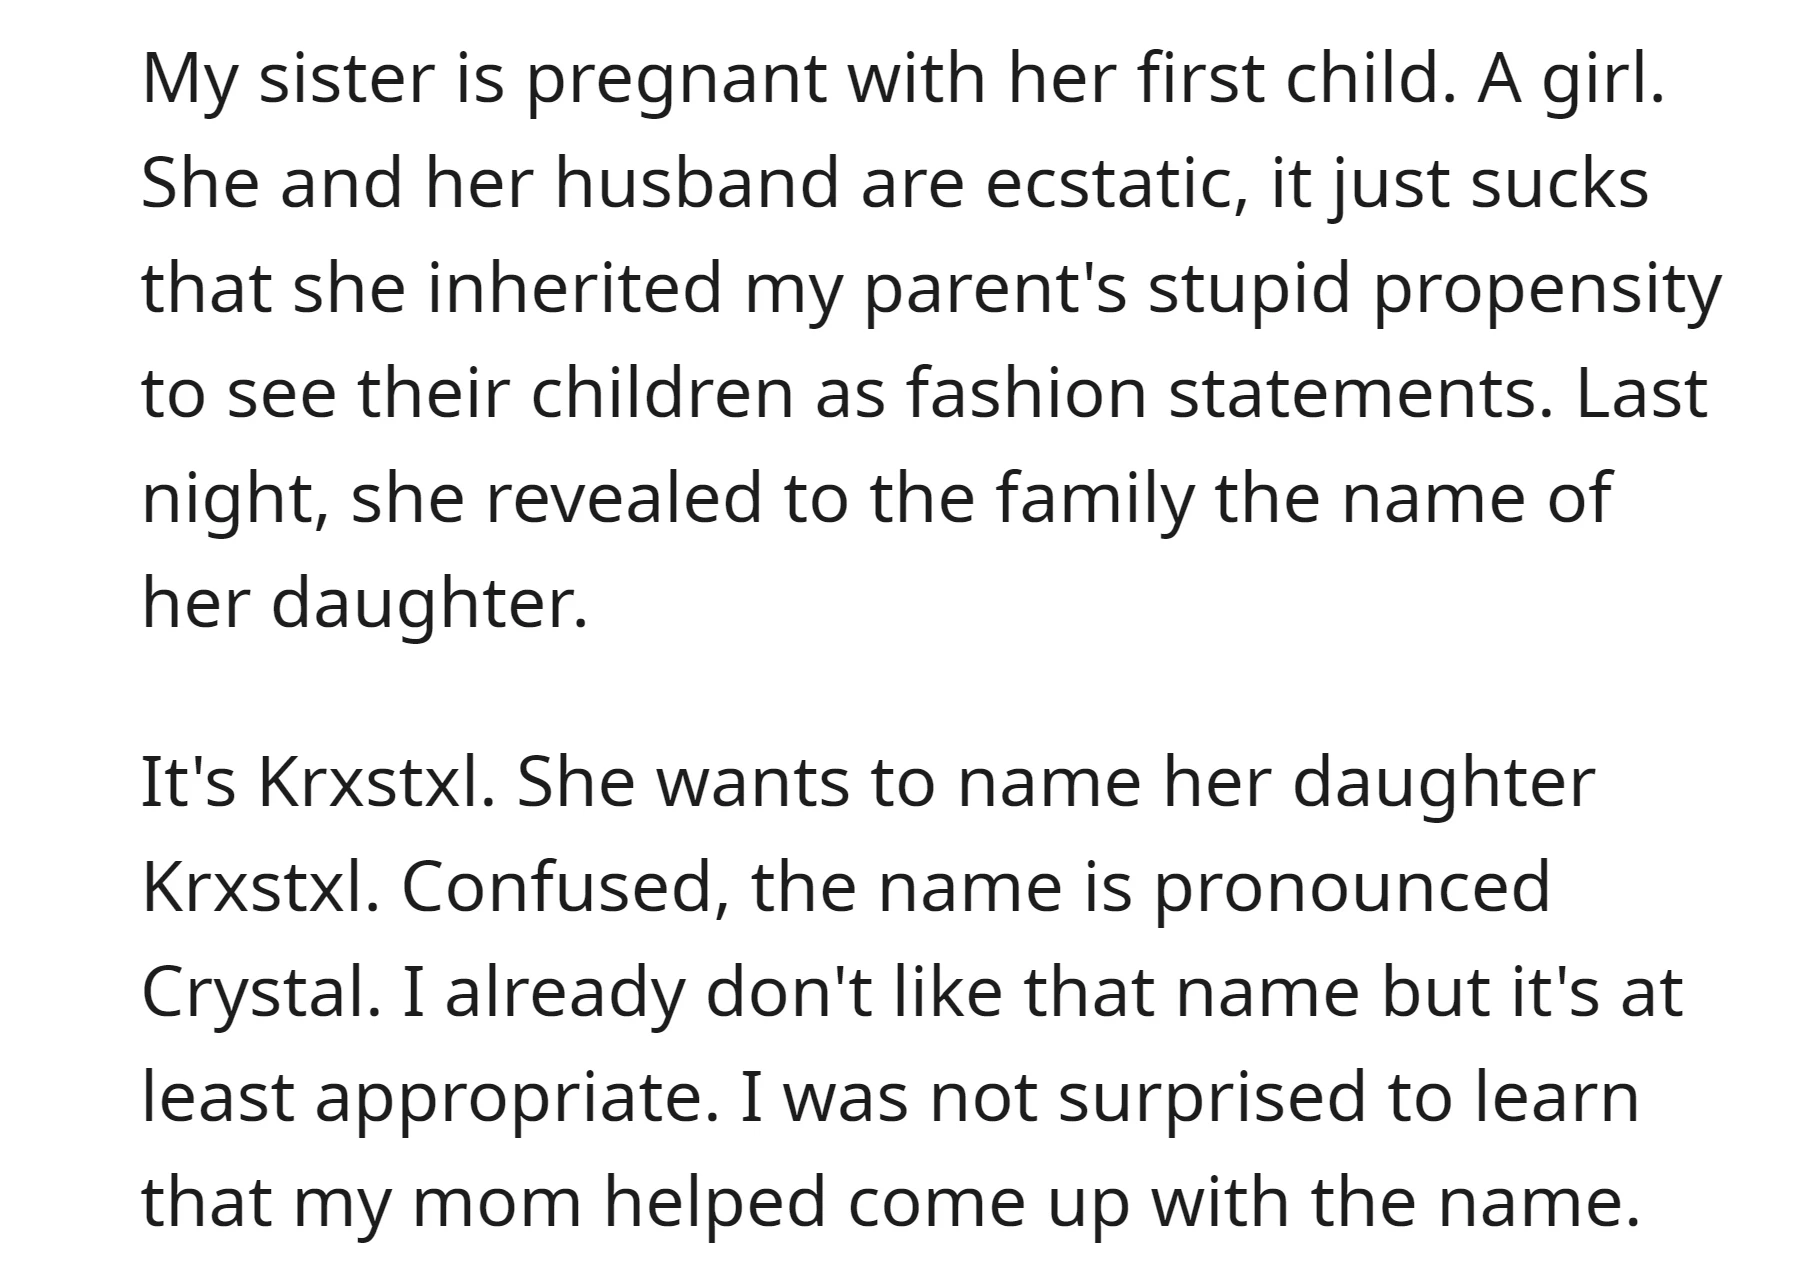 OP's pregnant sister, excited about having a girl, plans to name her daughter Krxstxl, pronounced Crystal